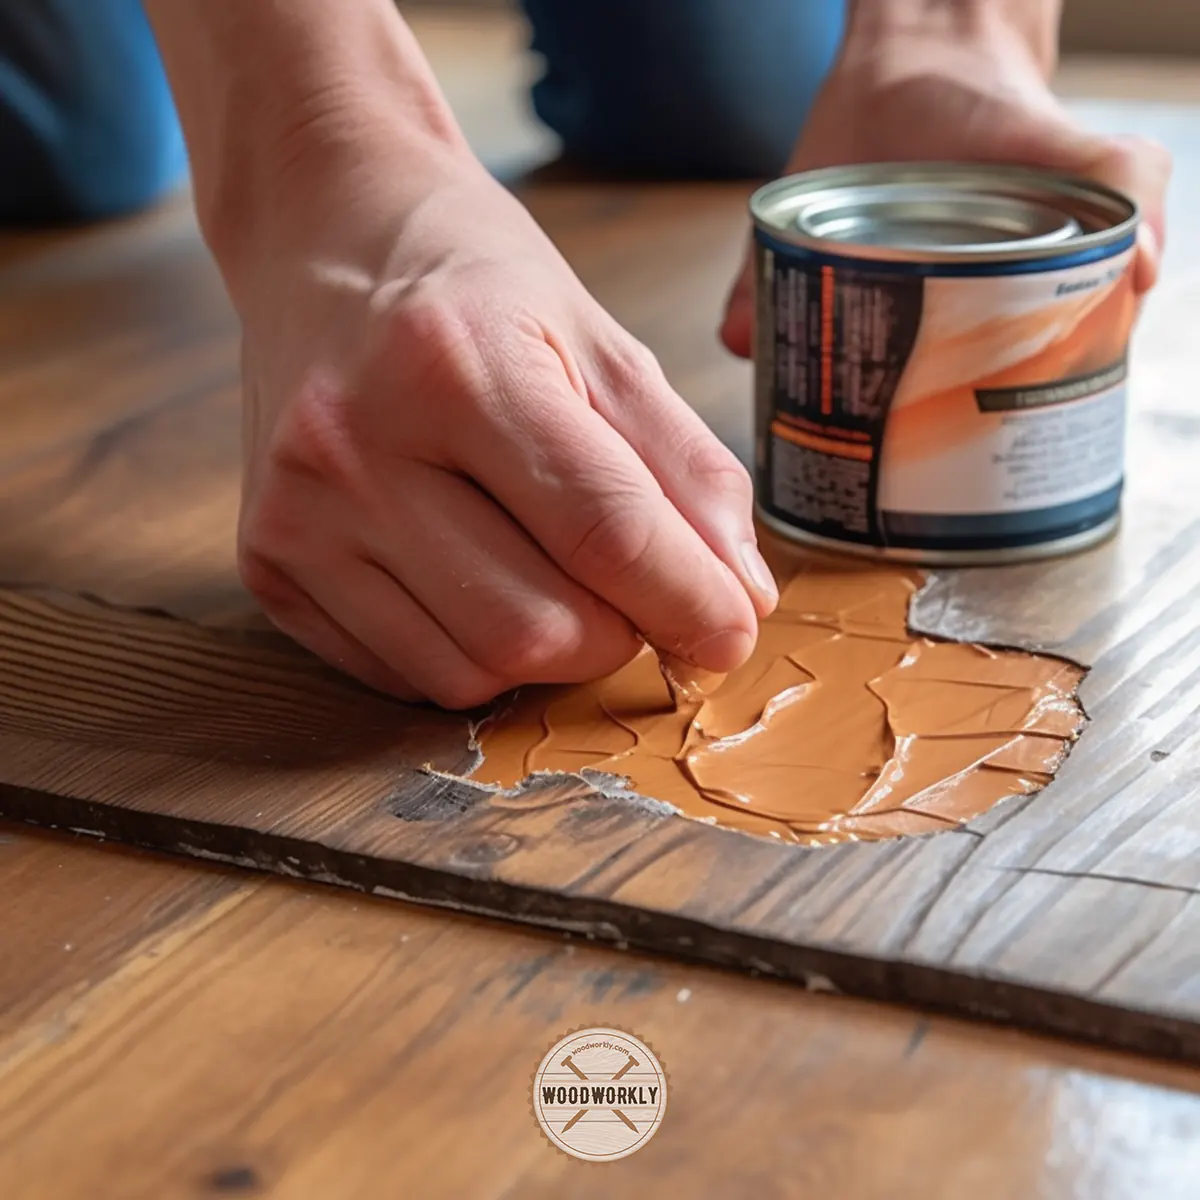 Applying wood filler on cracked wood surface